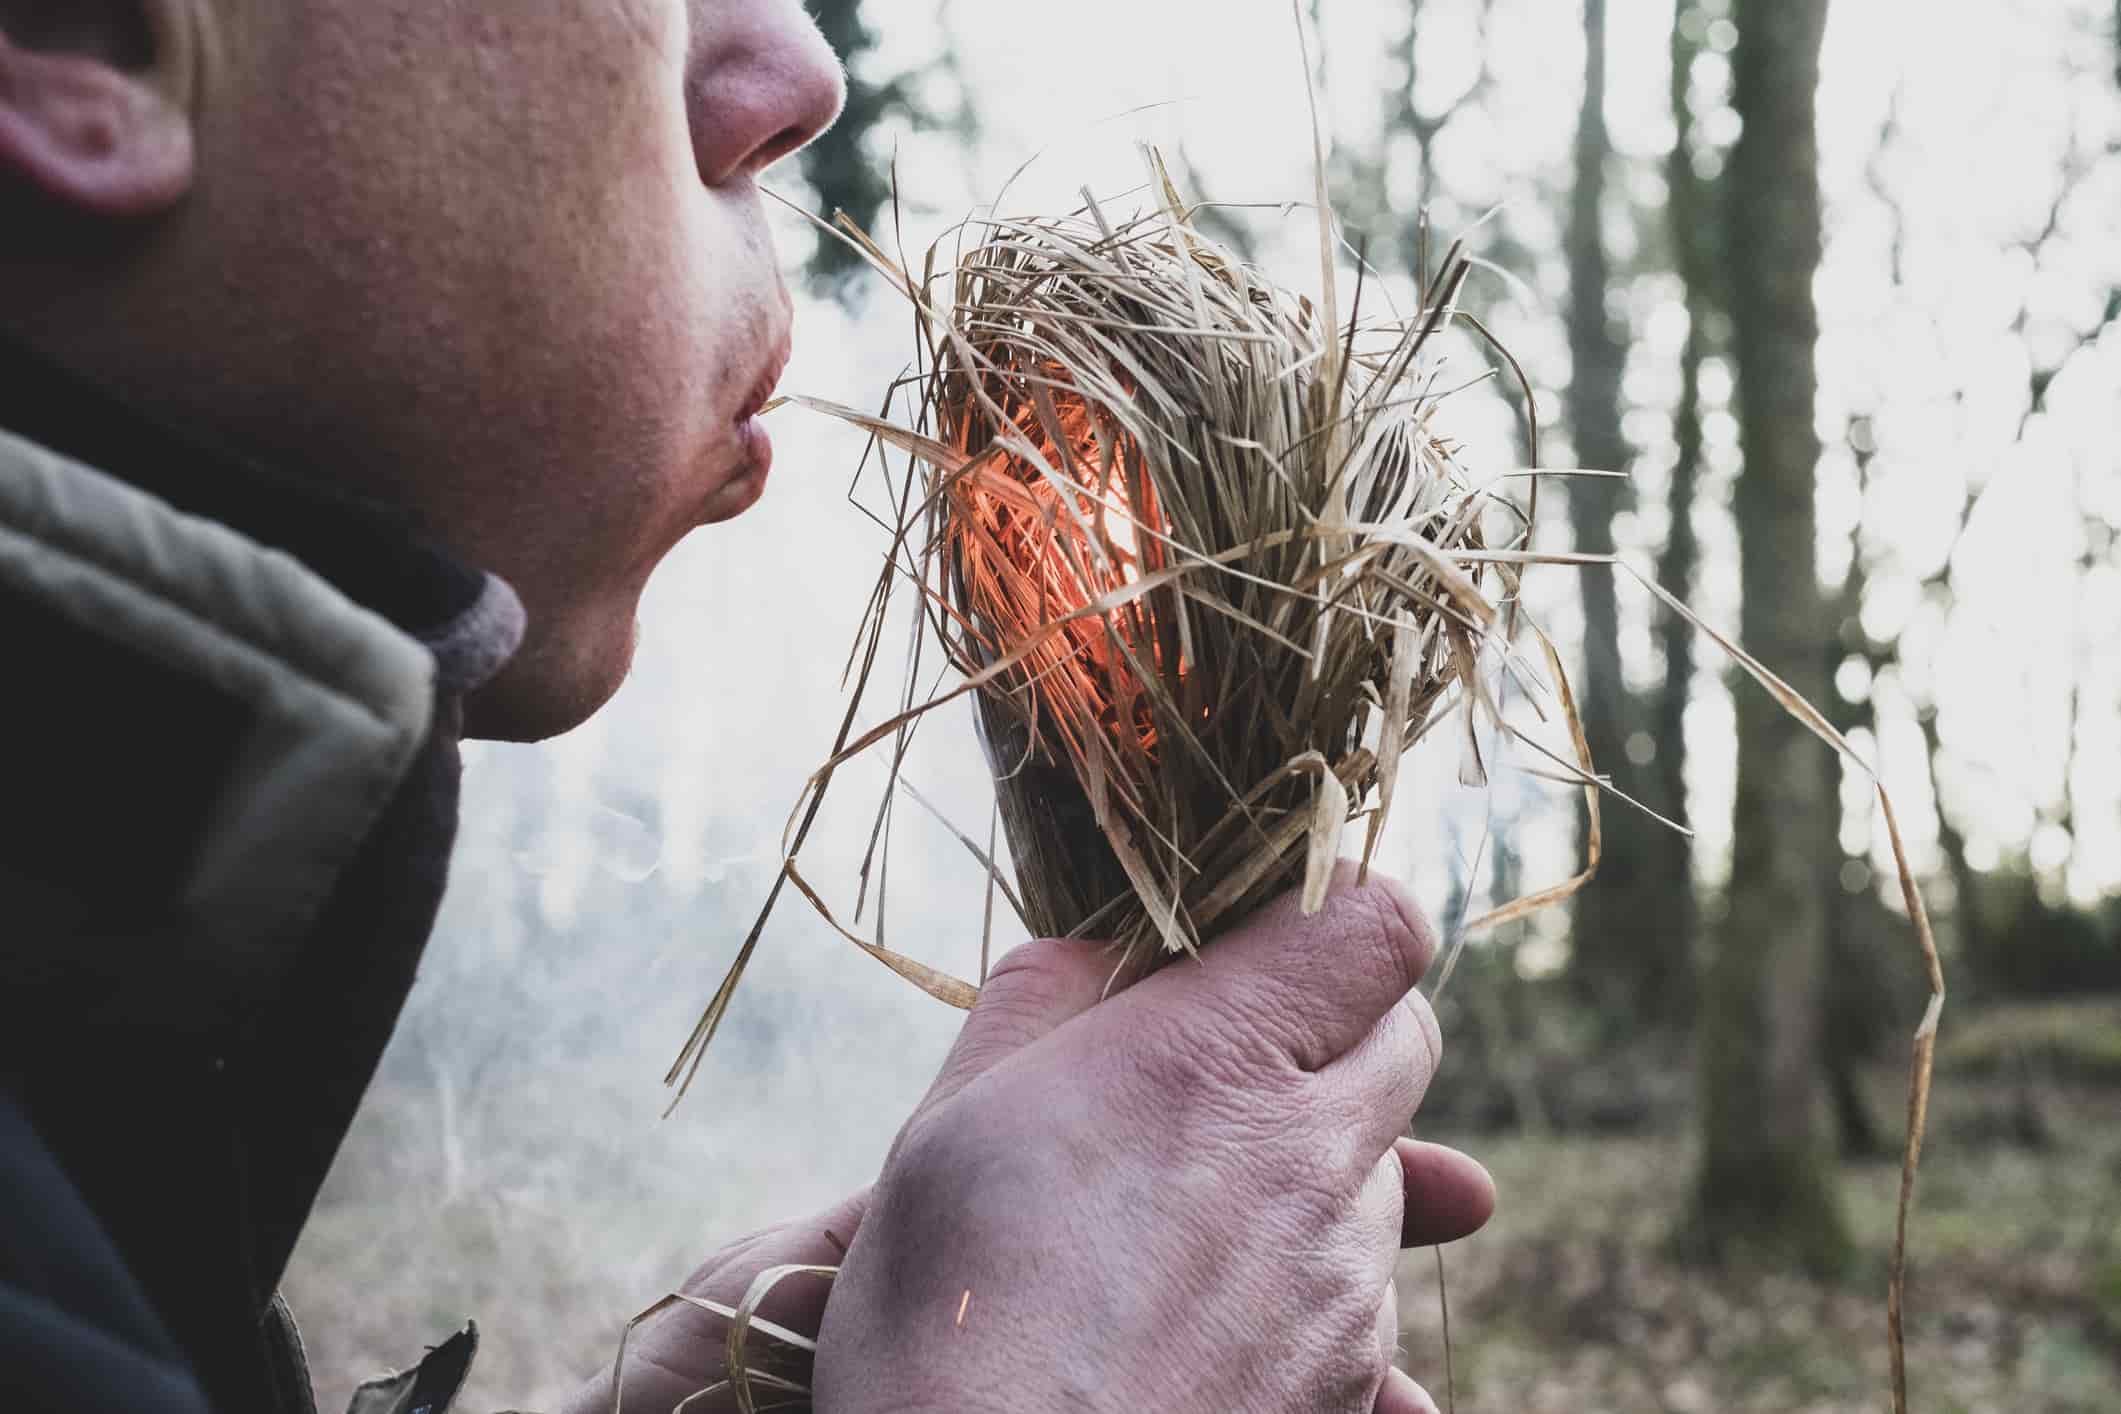 Close up of man blowing on bundle of straw, igniting fire